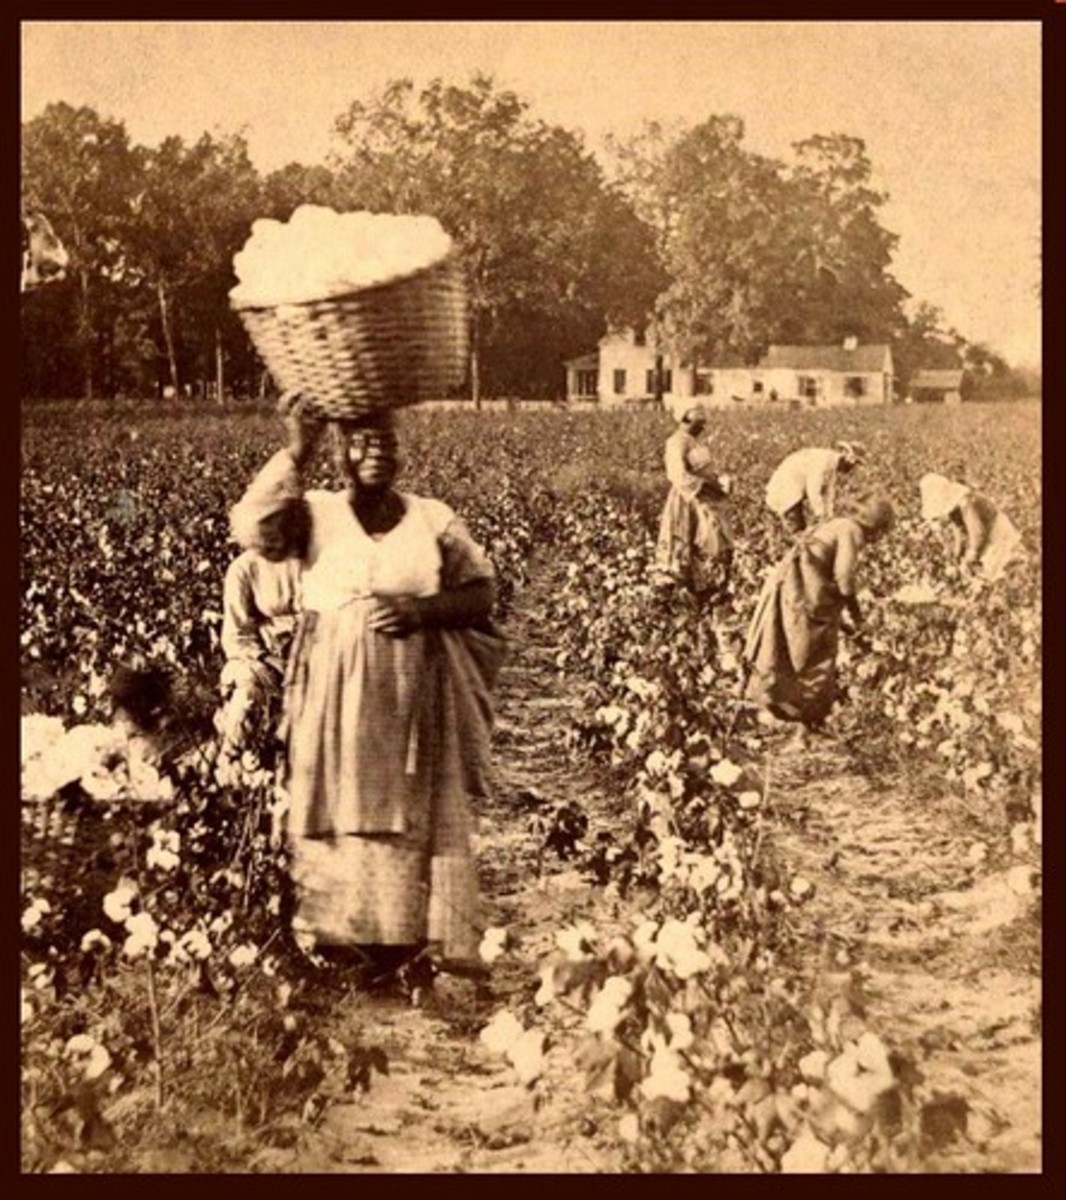 Slaves endured brutal working and living conditions.